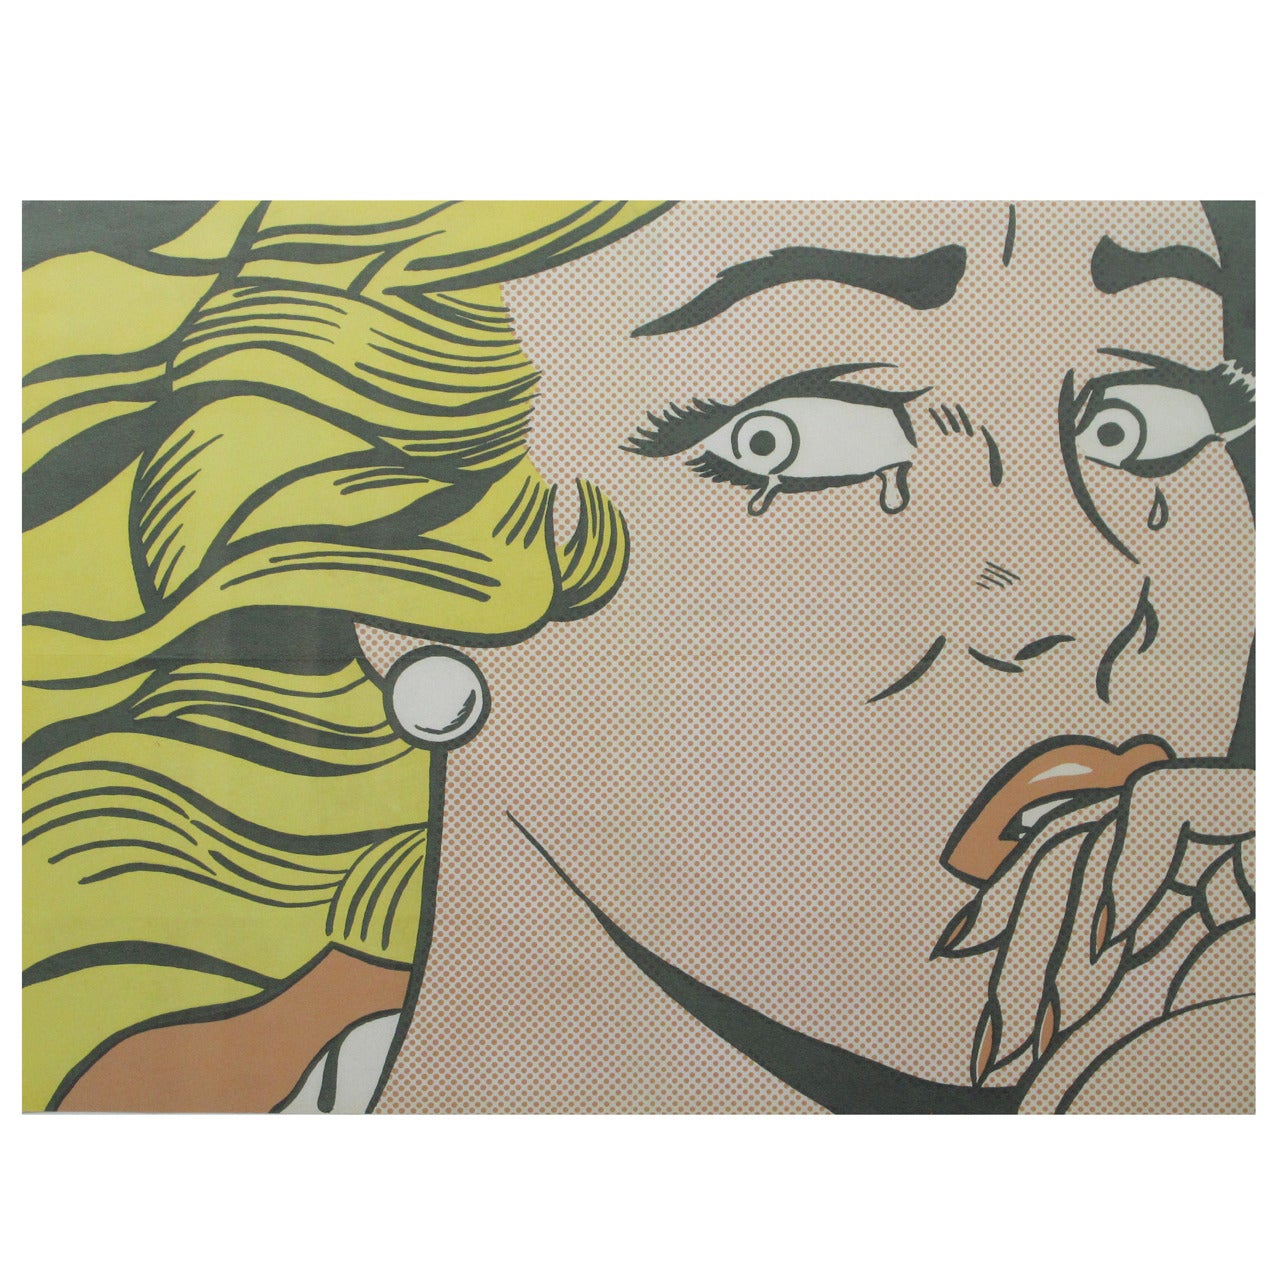 Crying Girl by Roy Lichtenstein offset Lithograph 1963